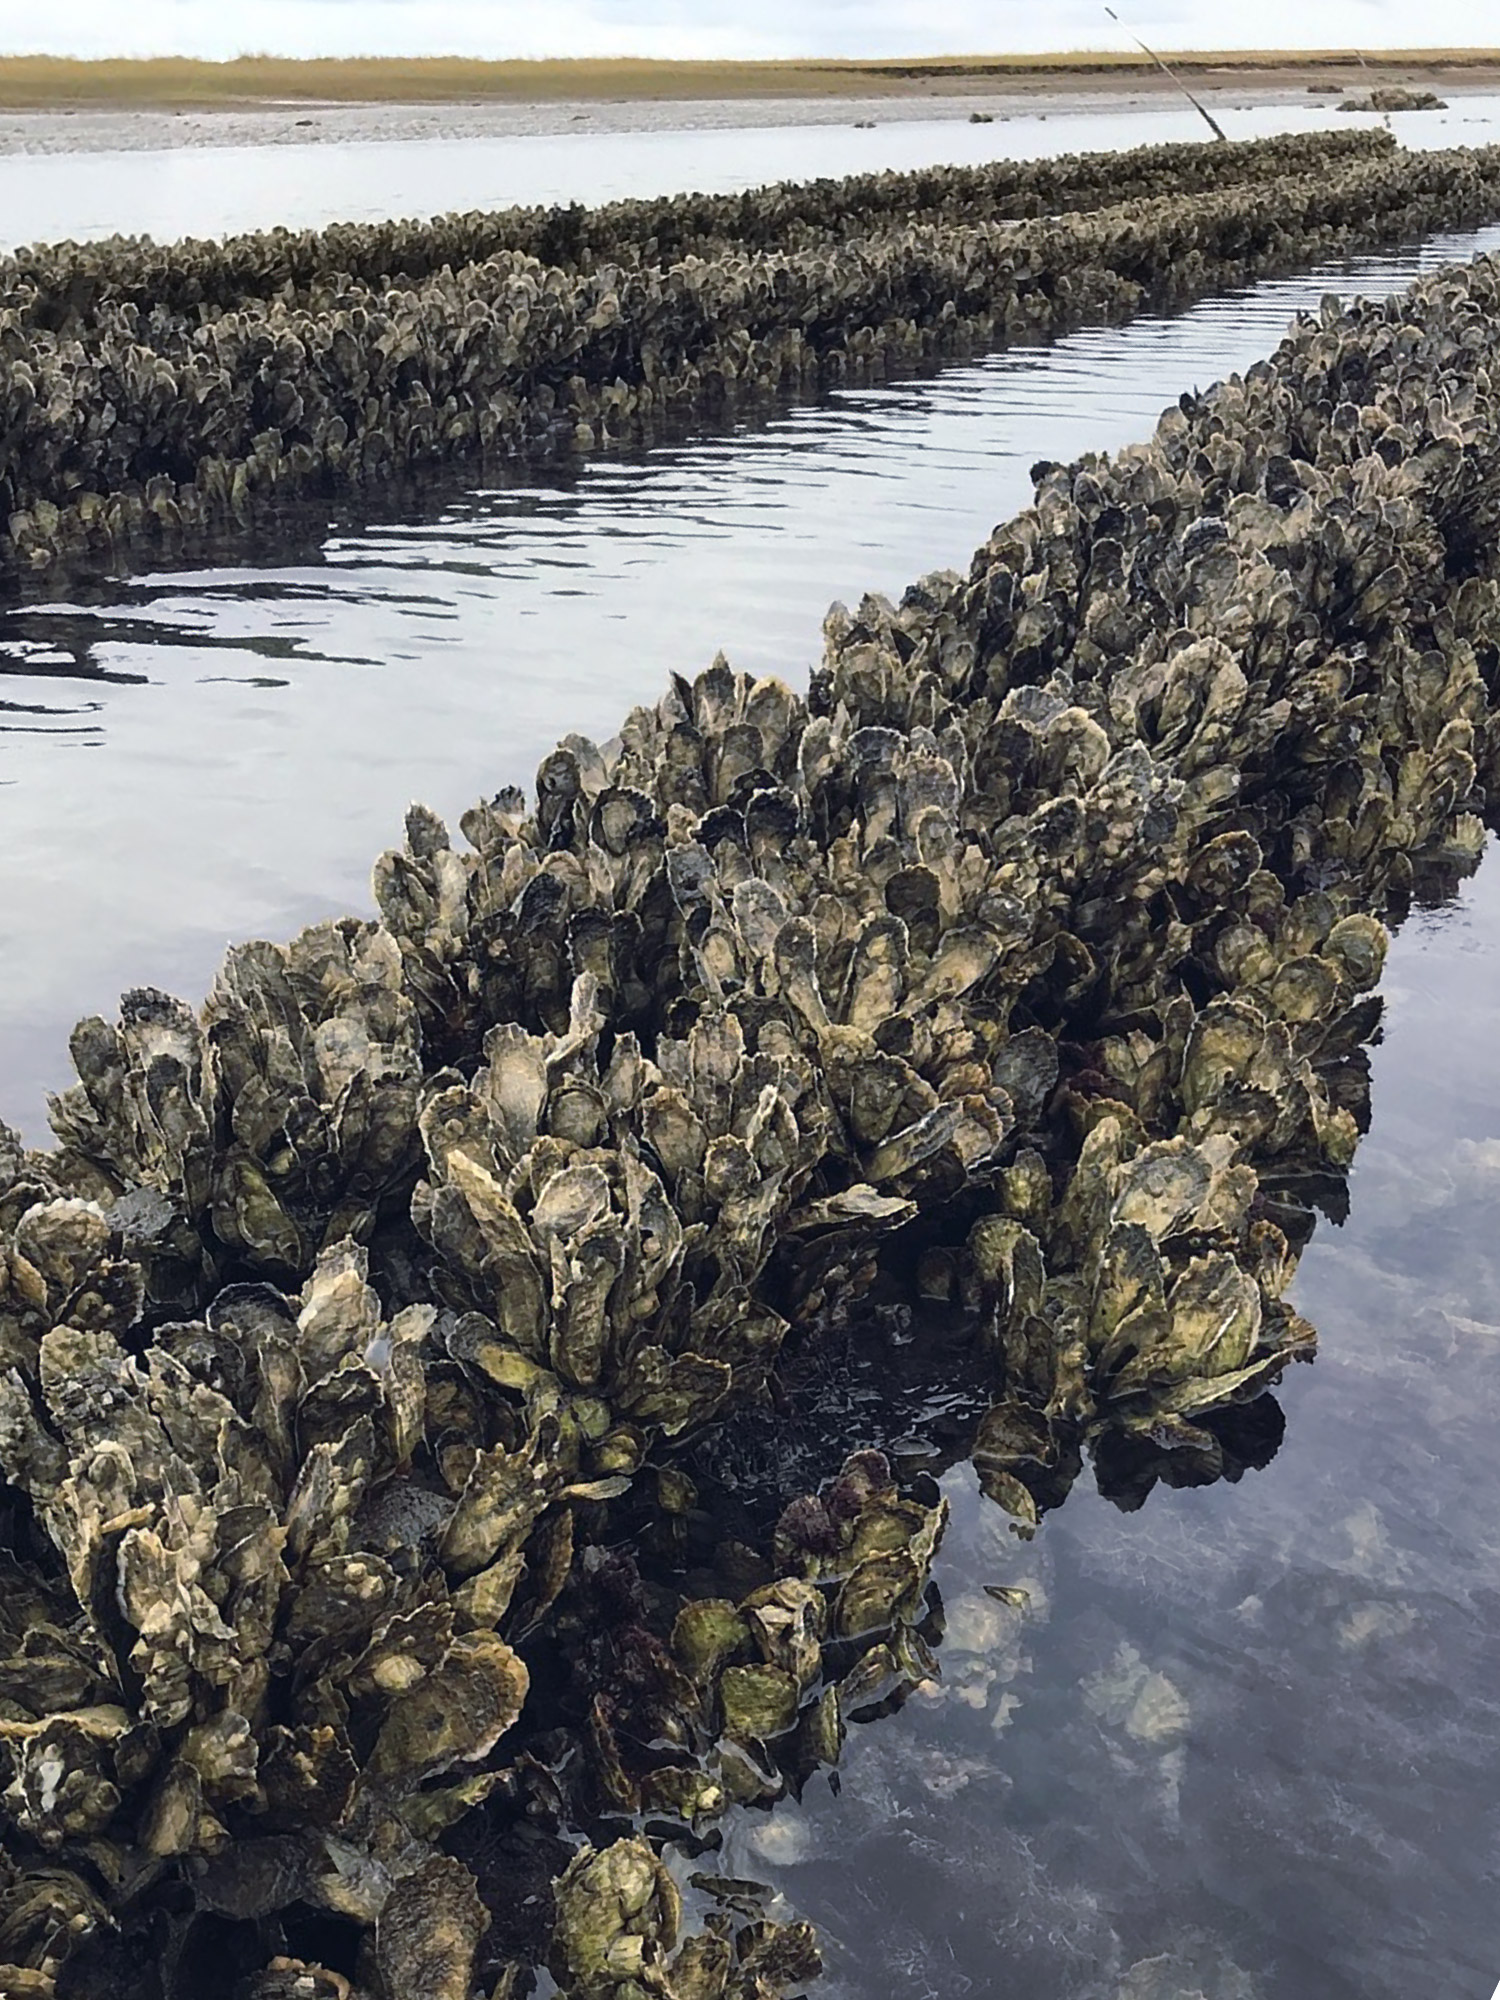 Oyster reef